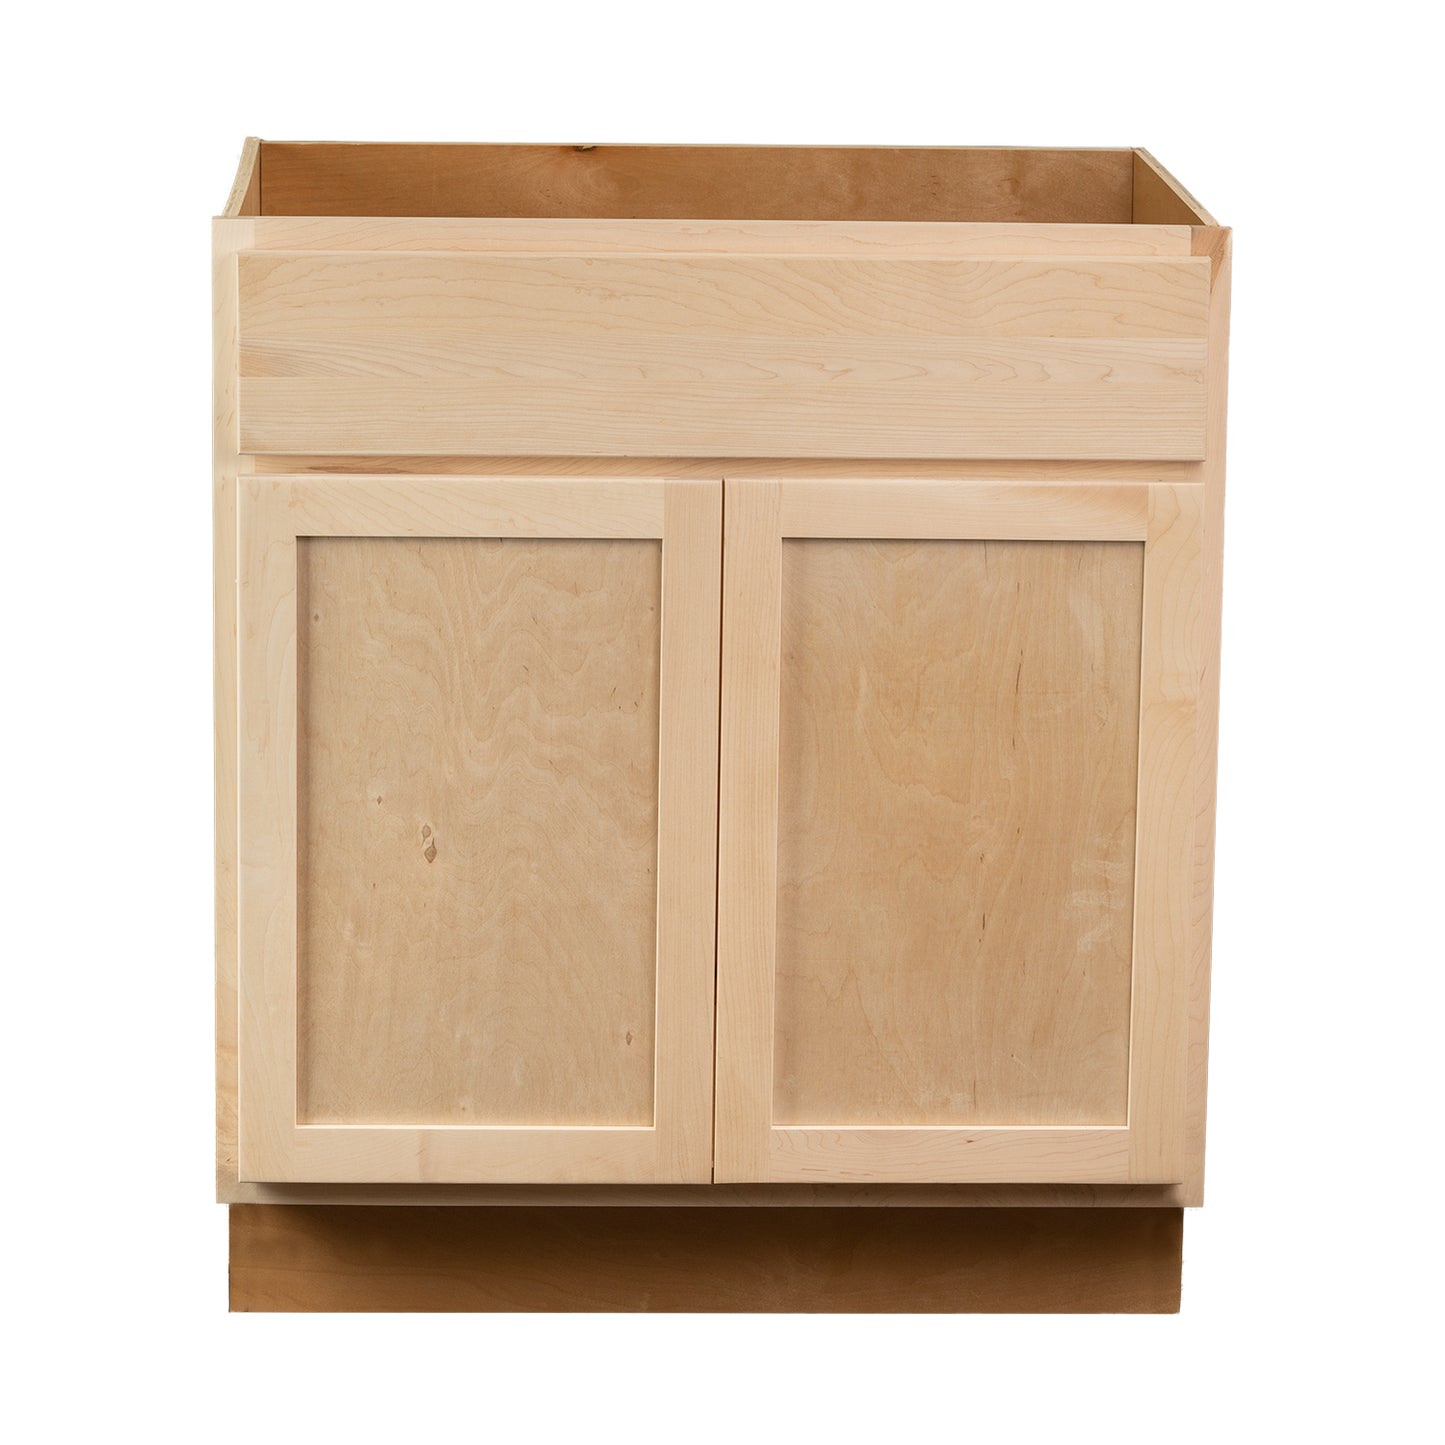 Quicklock RTA (Ready-to-Assemble) Raw Maple Vanity Base Cabinet | 36"Wx34.5"Hx21"D